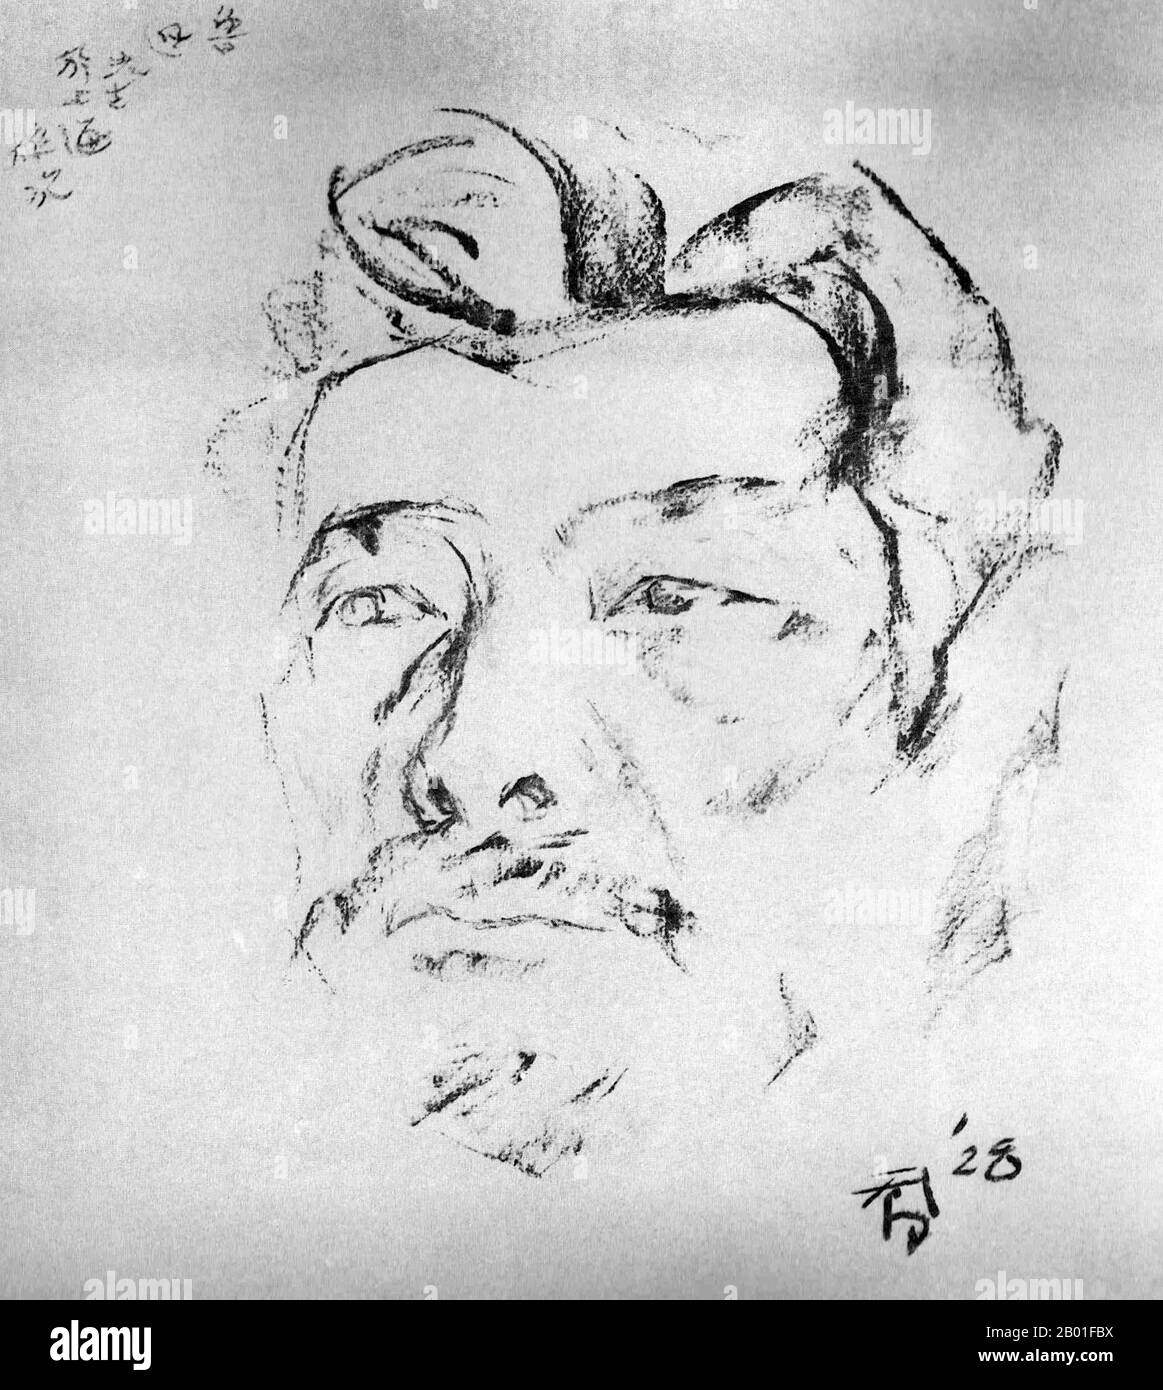 China: A sketch of the writer and social critic Lu Xun (25 September 1881 - 19 October 1936) at Shanghai by Situ Qiao (1902-1958), 1928.  Lu Xun (or Lu Hsun) was the pen name of Zhou Shuren (Chou Shu-jen), and was one of the major Chinese writers of the 20th century. Considered by many to be the founder of modern Chinese literature, he wrote in baihua (the vernacular) as well as classical Chinese. Lu Xun was a short story writer, editor, translator, critic, essayist and poet. In the 1930s he became the titular head of the Chinese League of the Left-Wing Writers in Shanghai. Stock Photo